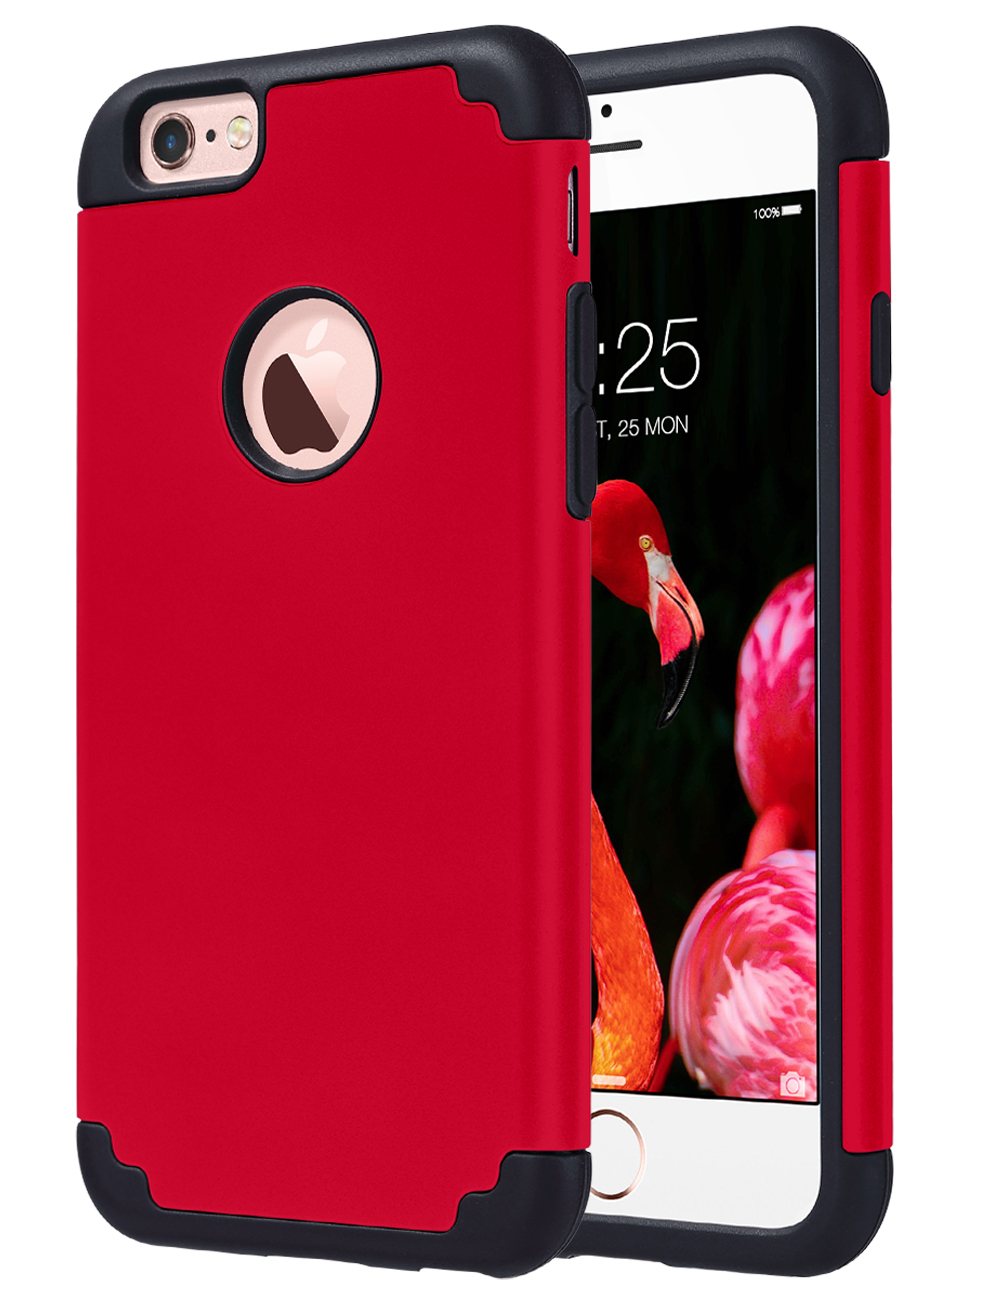 ULAK iPhone 6 Case, iPhone 6S Case, Slim Dual Layer Shockproof Bumper Phone Case for Apple iPhone 6 / 6s for Girls Women, Red - image 3 of 7